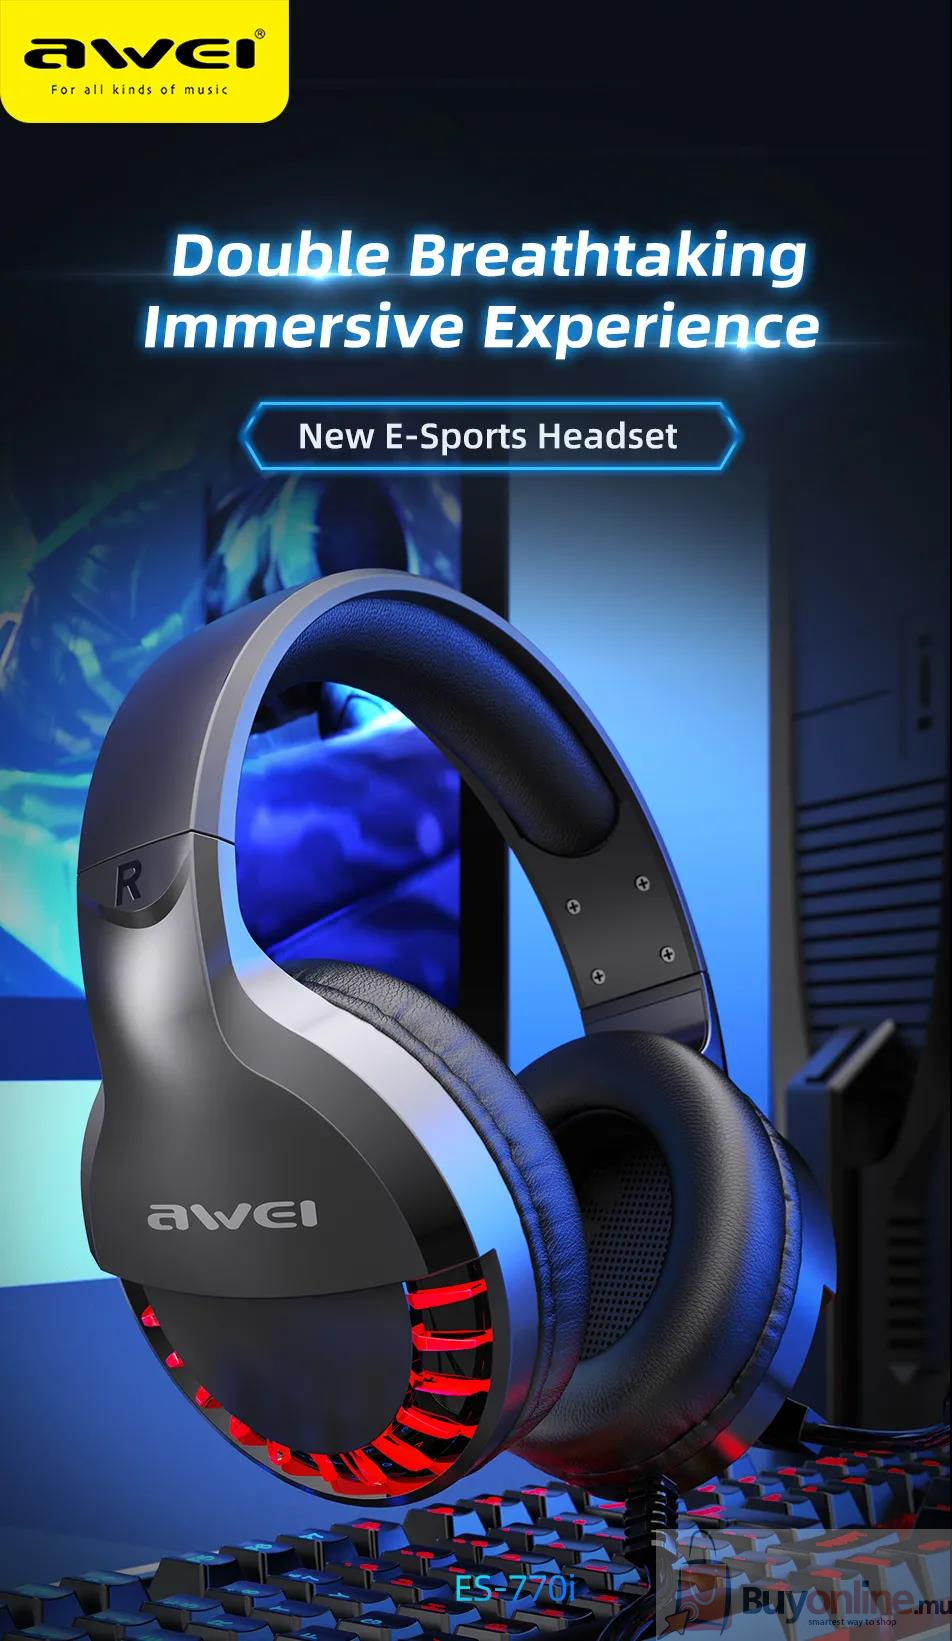 image 2022 01 24 001743 - AWEI ES-770i Wired Professional Led Light Game Headphone With Microphone For PC Computer Game Stereo 7.1 Bass Sound 50mm Speaker - BuyOnline.mu - Gaming Headphone,Game Headphone,Gaming Headset